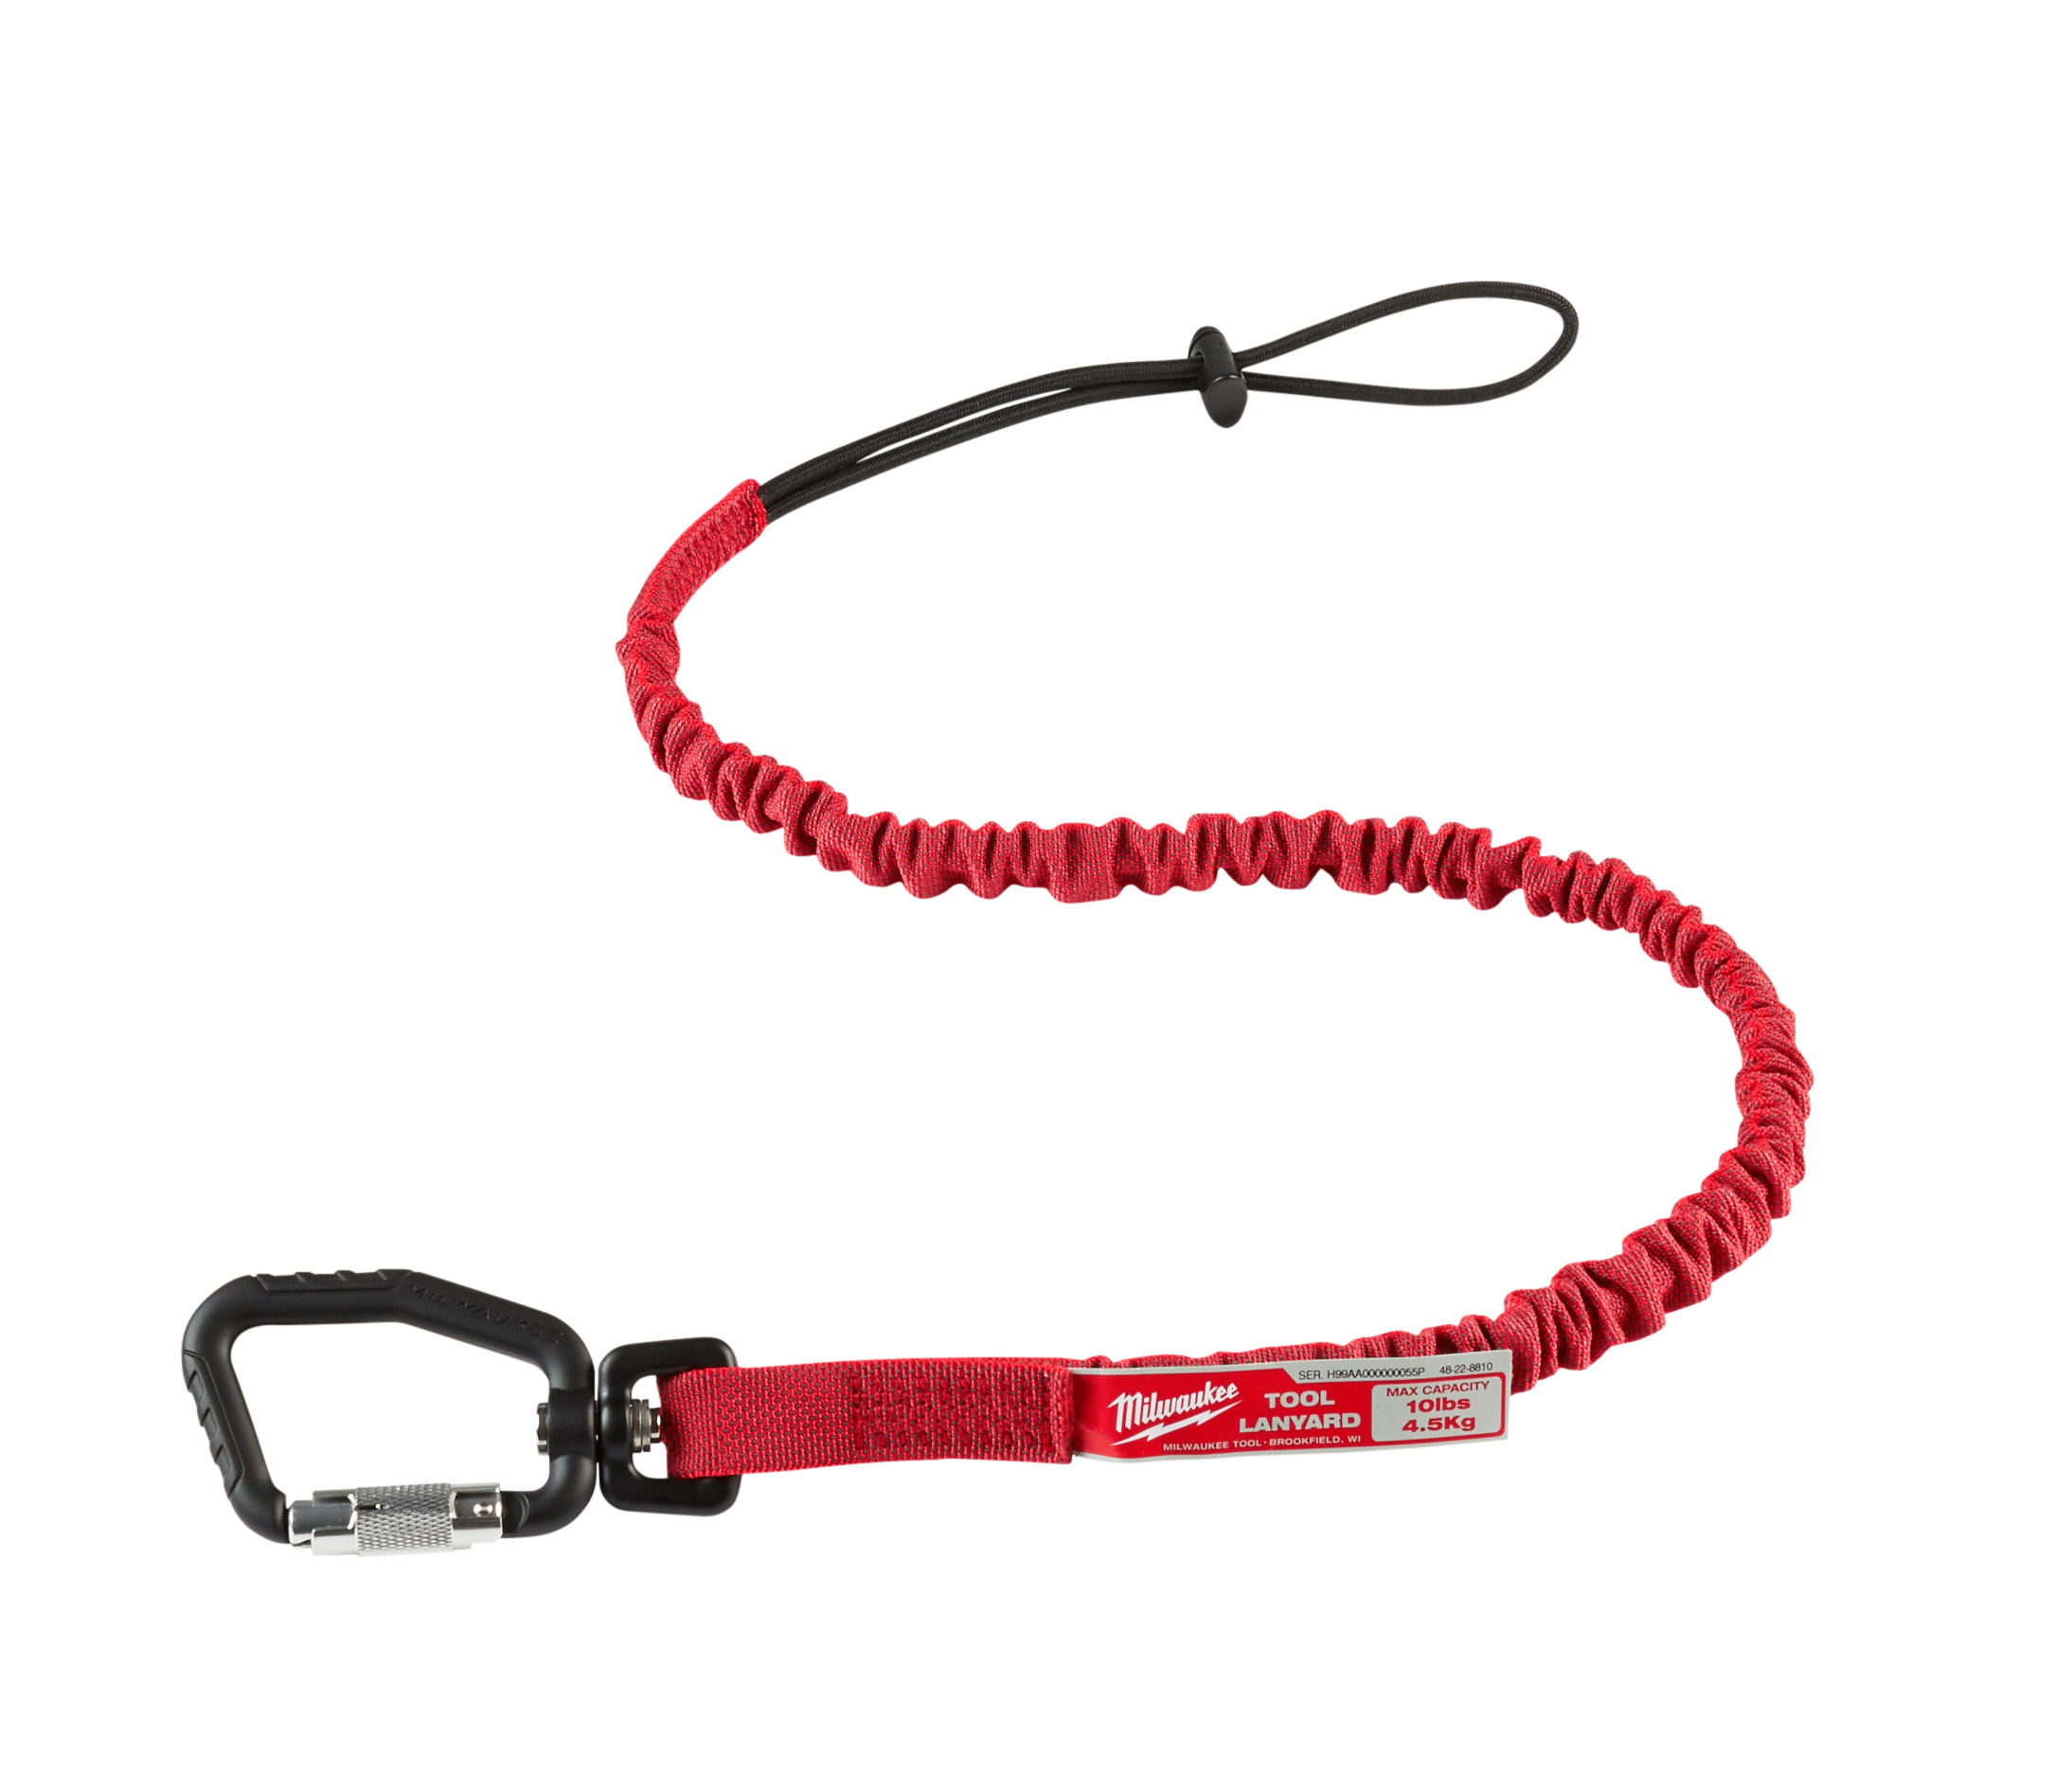 Milwaukee® 10 lb. Locking tool lanyard helps users stay safe and stay productive while working at heights by reducing the risks associated with dropped tools. The lanyard body is engineered to provide the best shock absorption, slowing the tool gradually if a drop occurs. Locking carabiners require double actions to open, ensuring a secure connection. Integrated swiveling carabiner reduces twists when using tools. The red color coded lanyard allows the user to easily identify the lanyard's weight rating. For use with tools up to ten pounds.